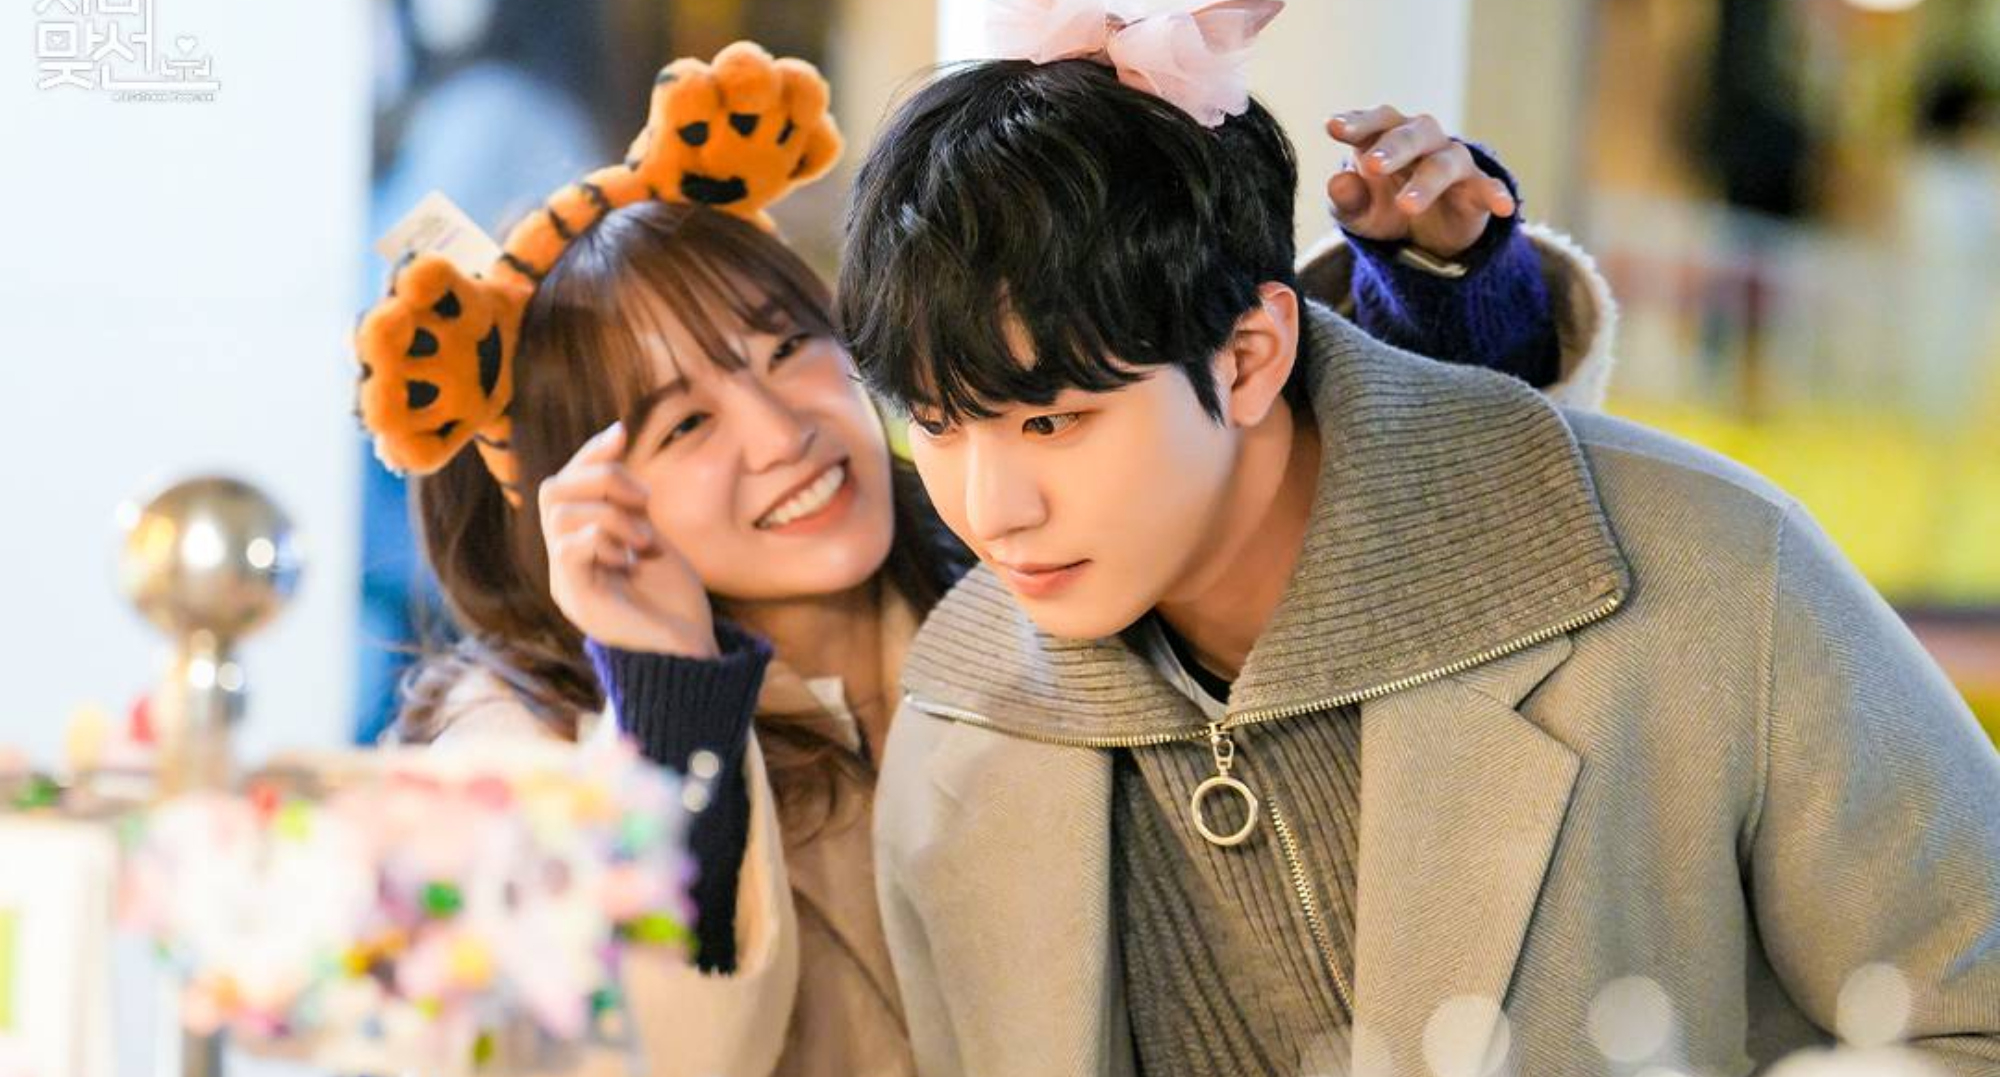 4 of the Best Romantic Comedy KDramas From Netflix in 2022